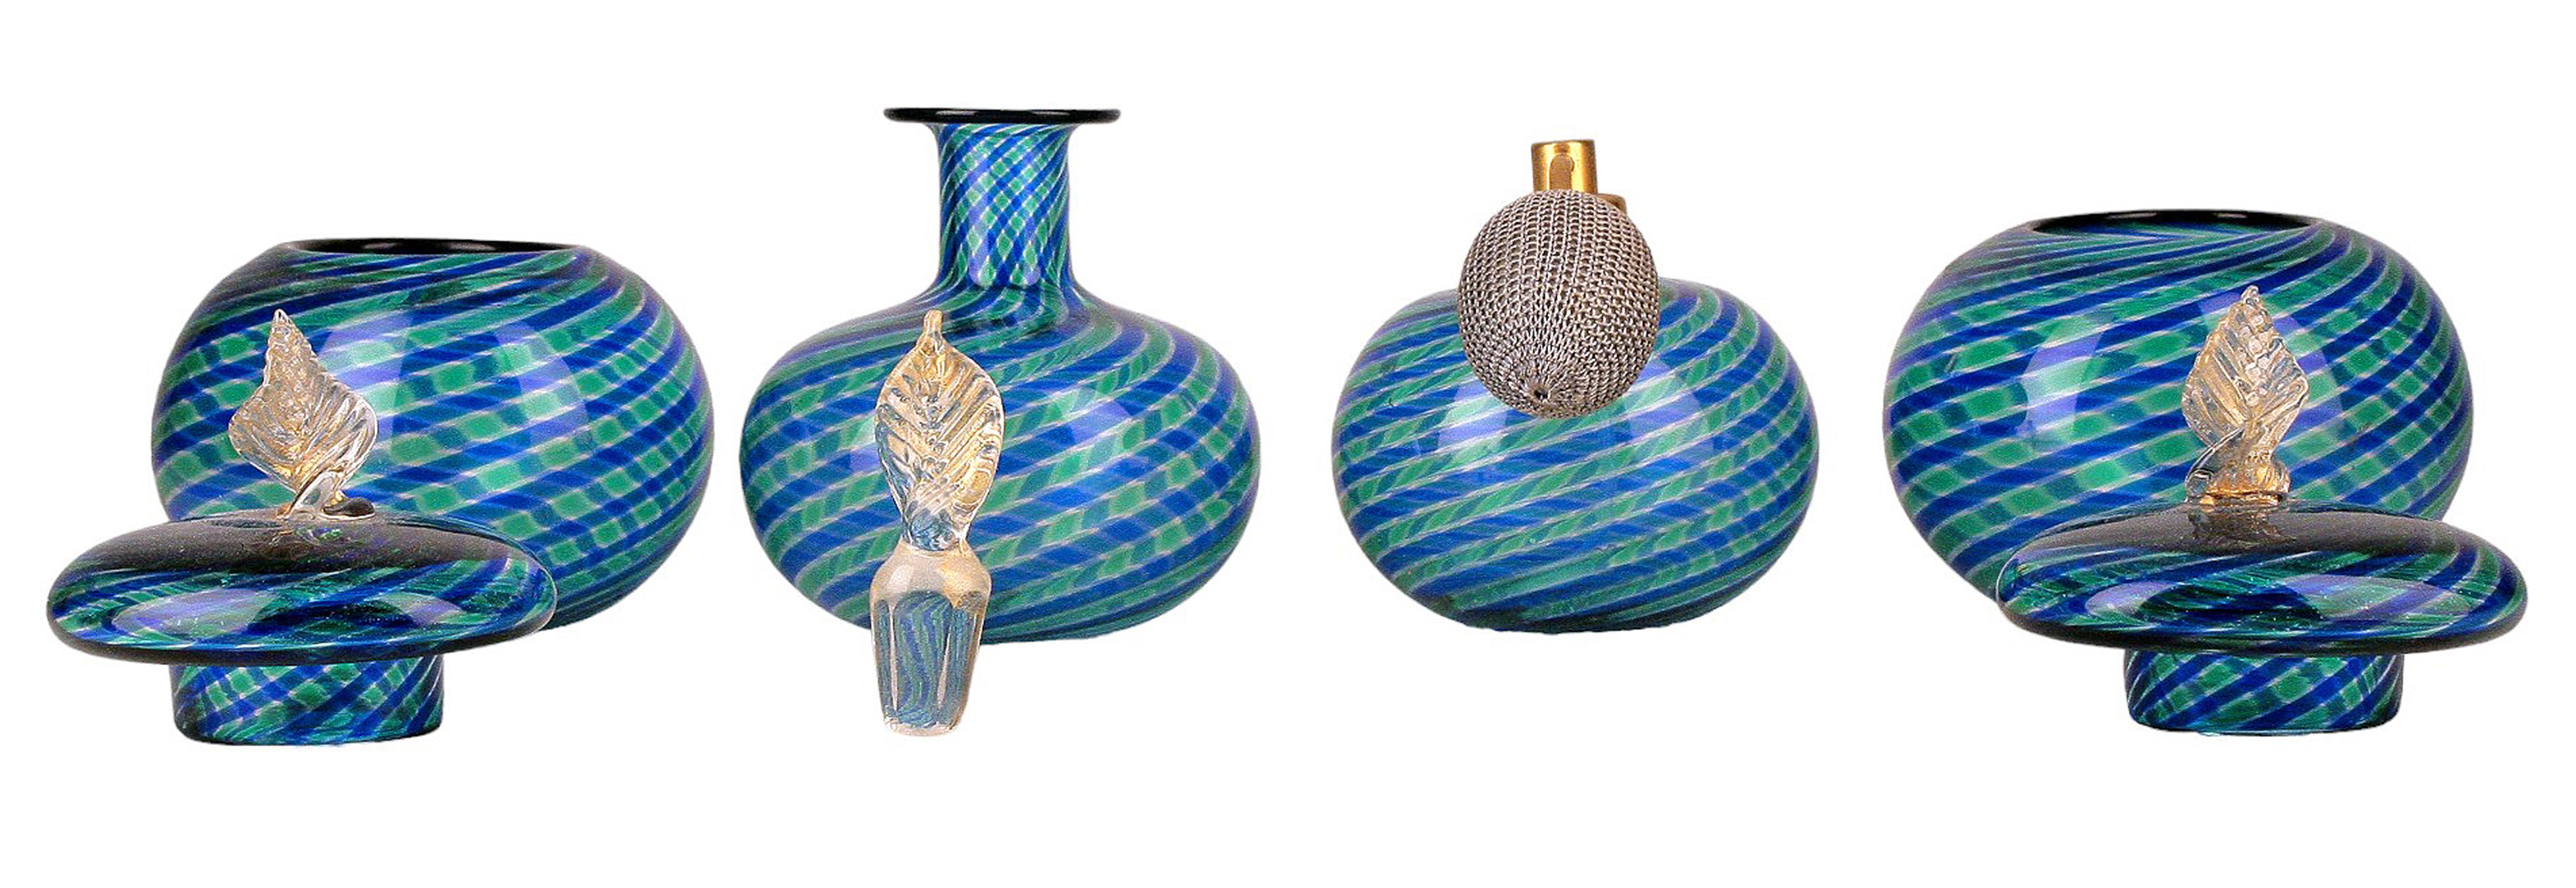 Cast Murano 'Canne' Glass Vaporizer, Perfume Bottle and Powder Boxes Set by La Fenice For Sale